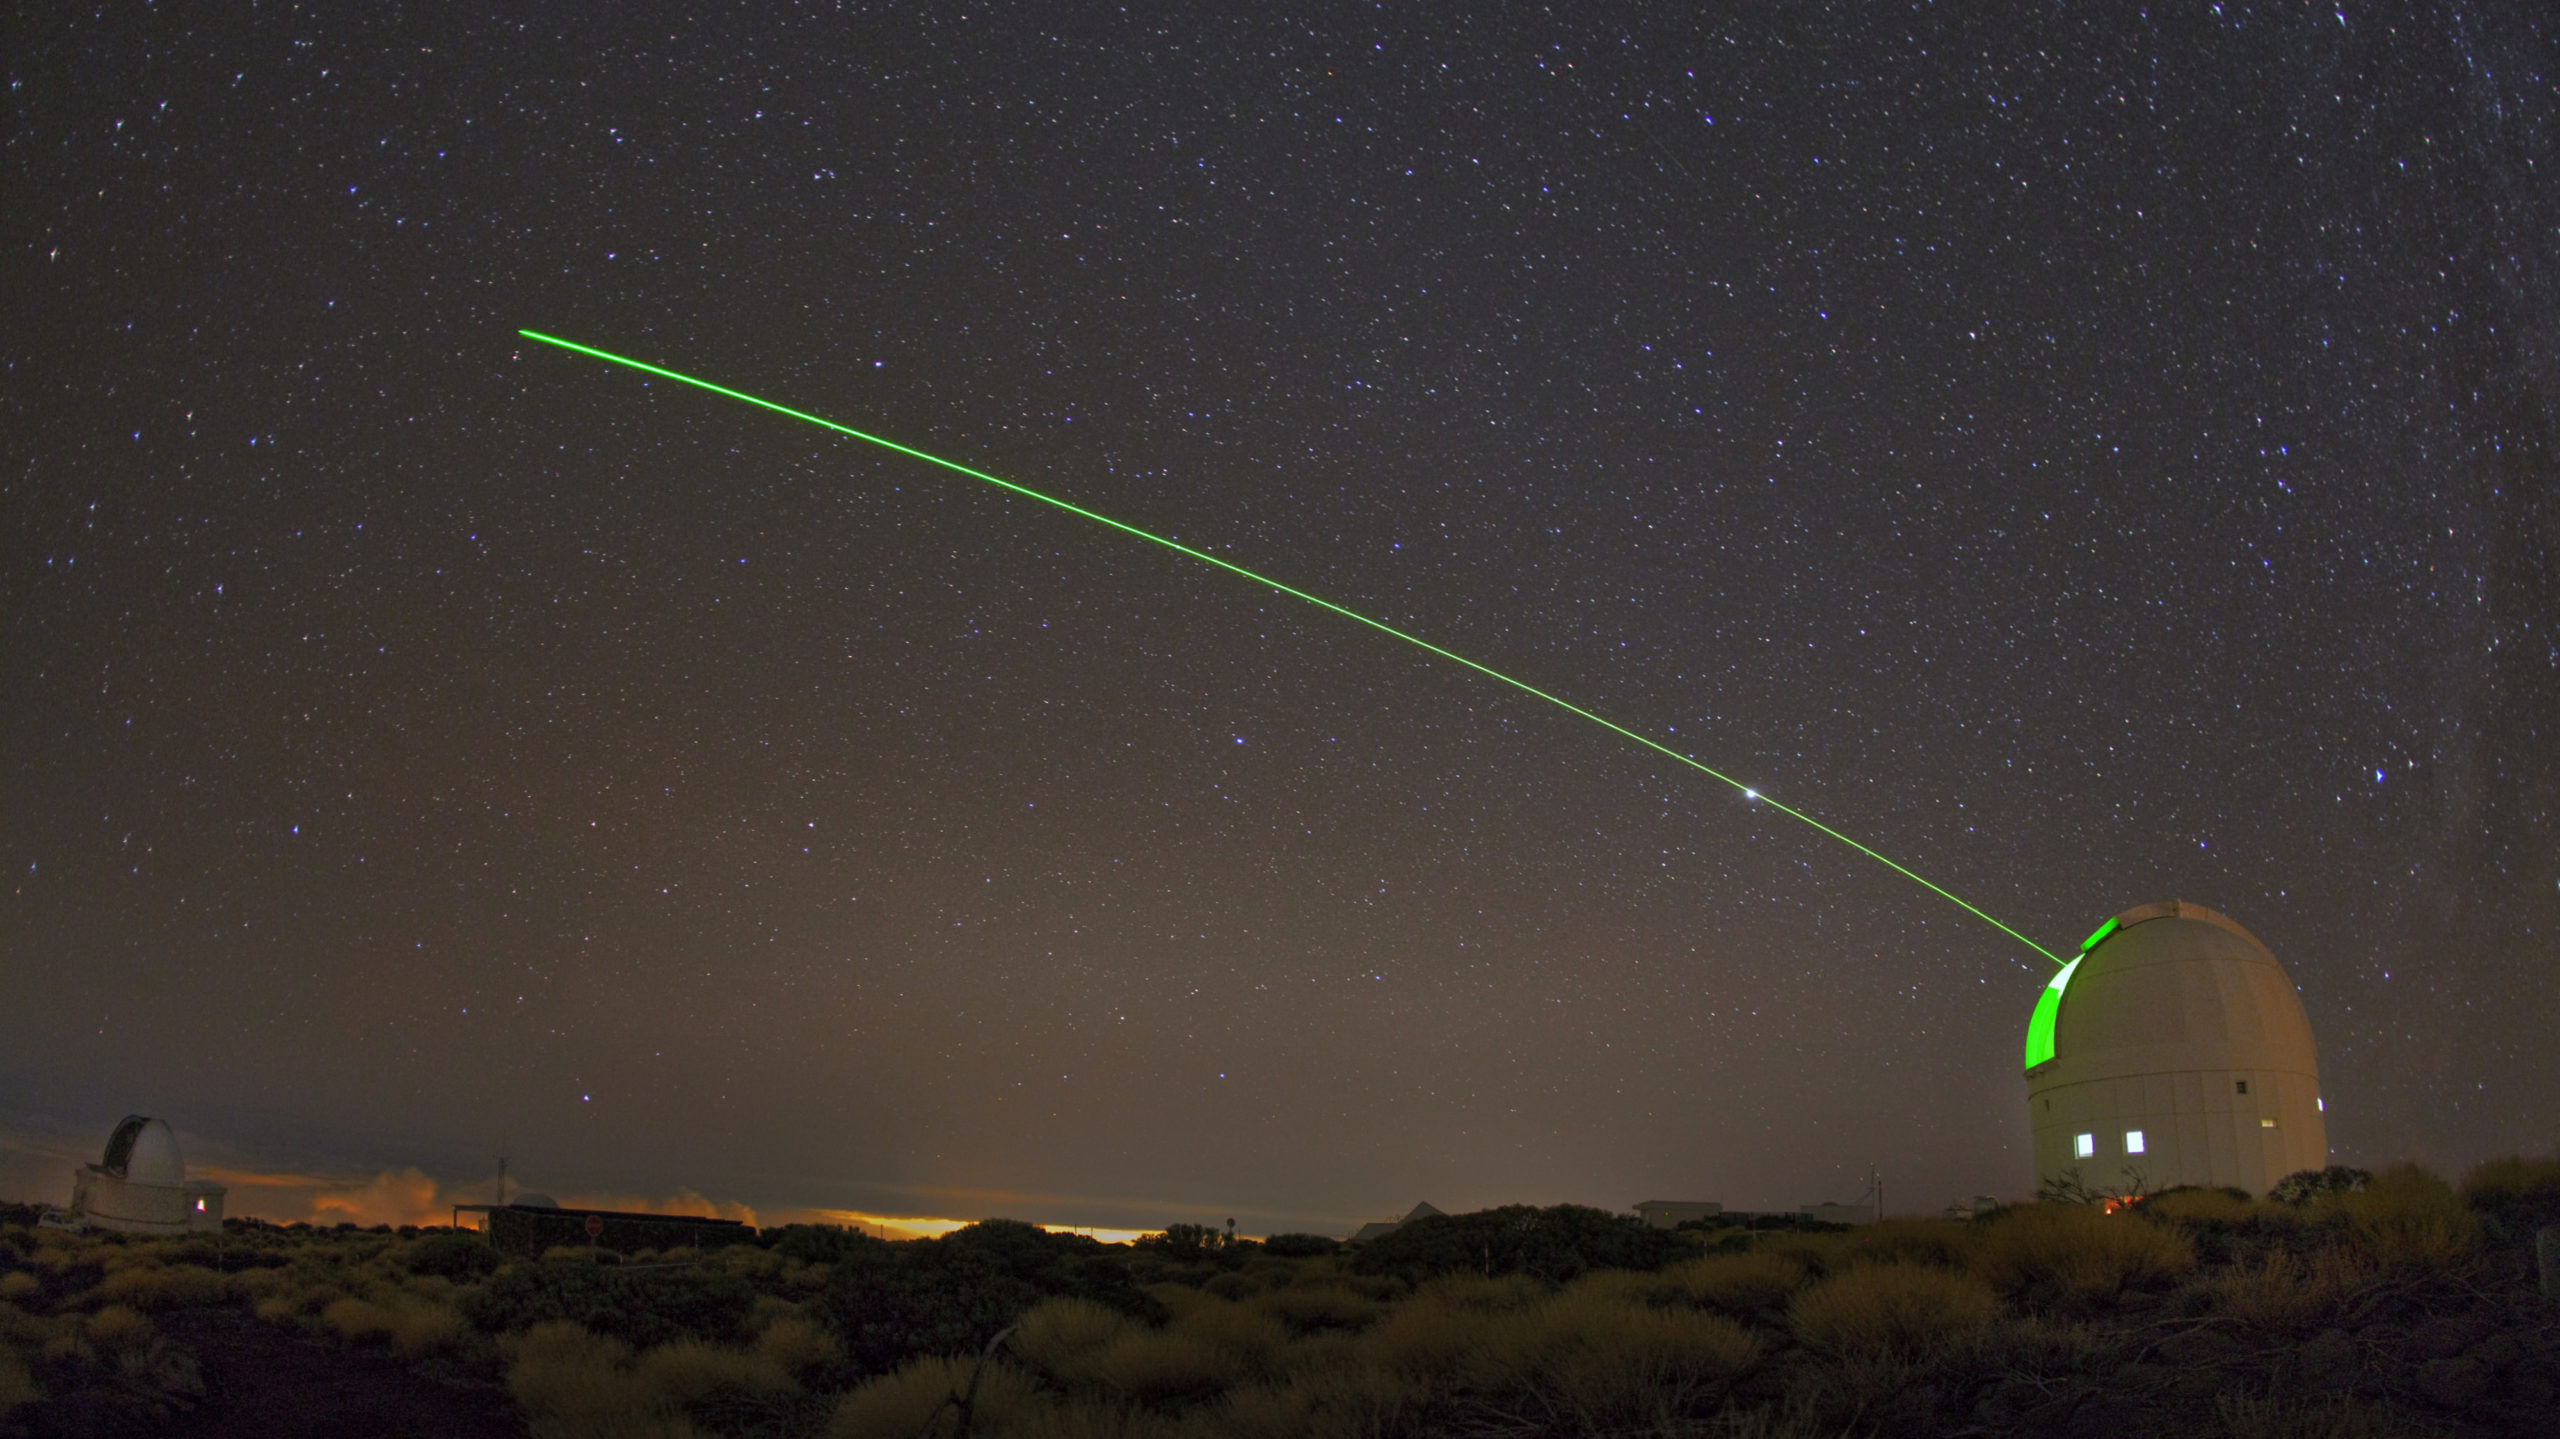 A visible green laser shines from ESA's Optical Ground Station (OGS). (Image: IAC– Daniel López)